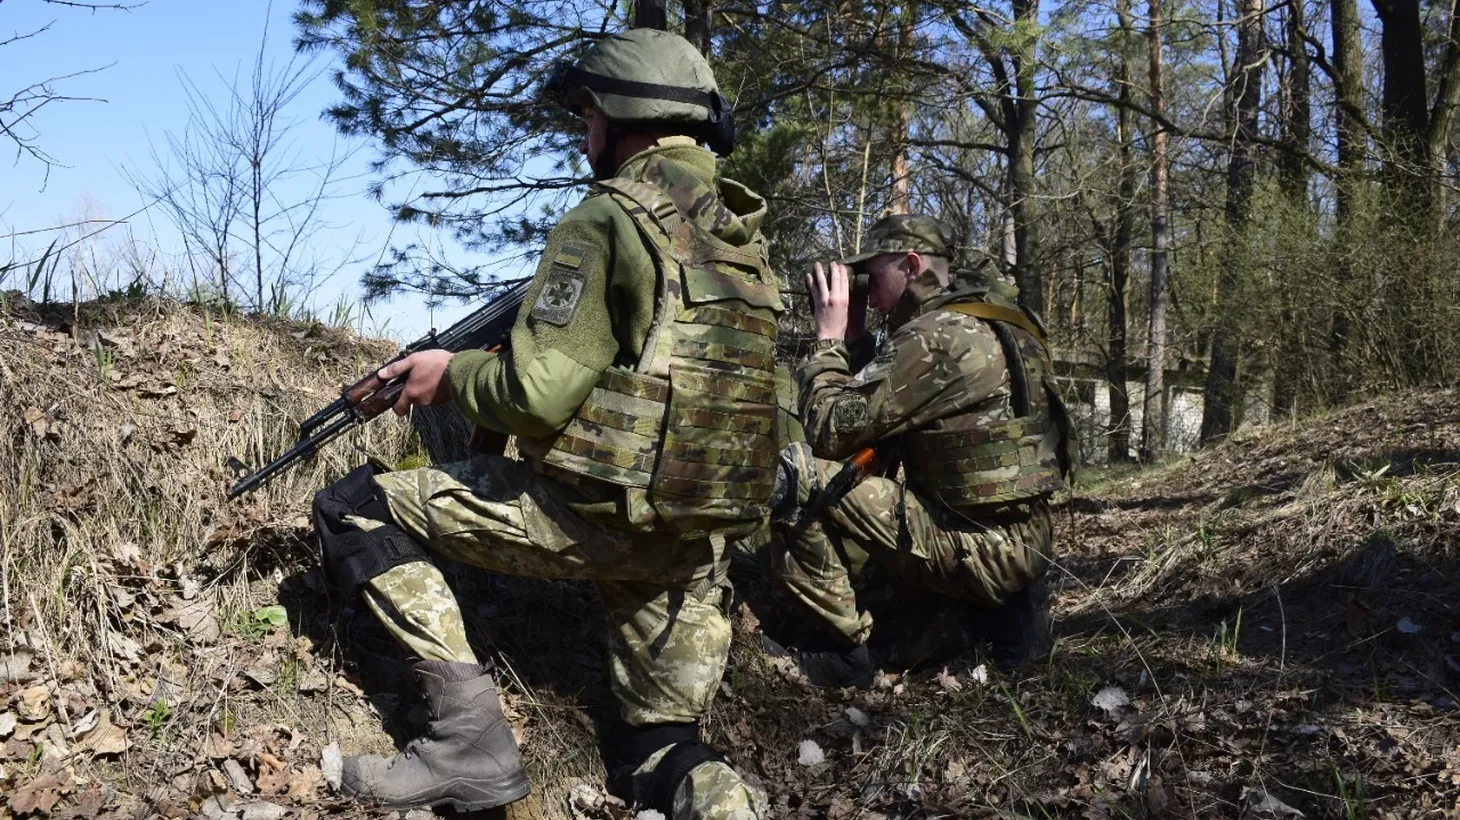 Members of the Ukrainian Armed Forces are deployed on the border with Russia, May 4, 2022.